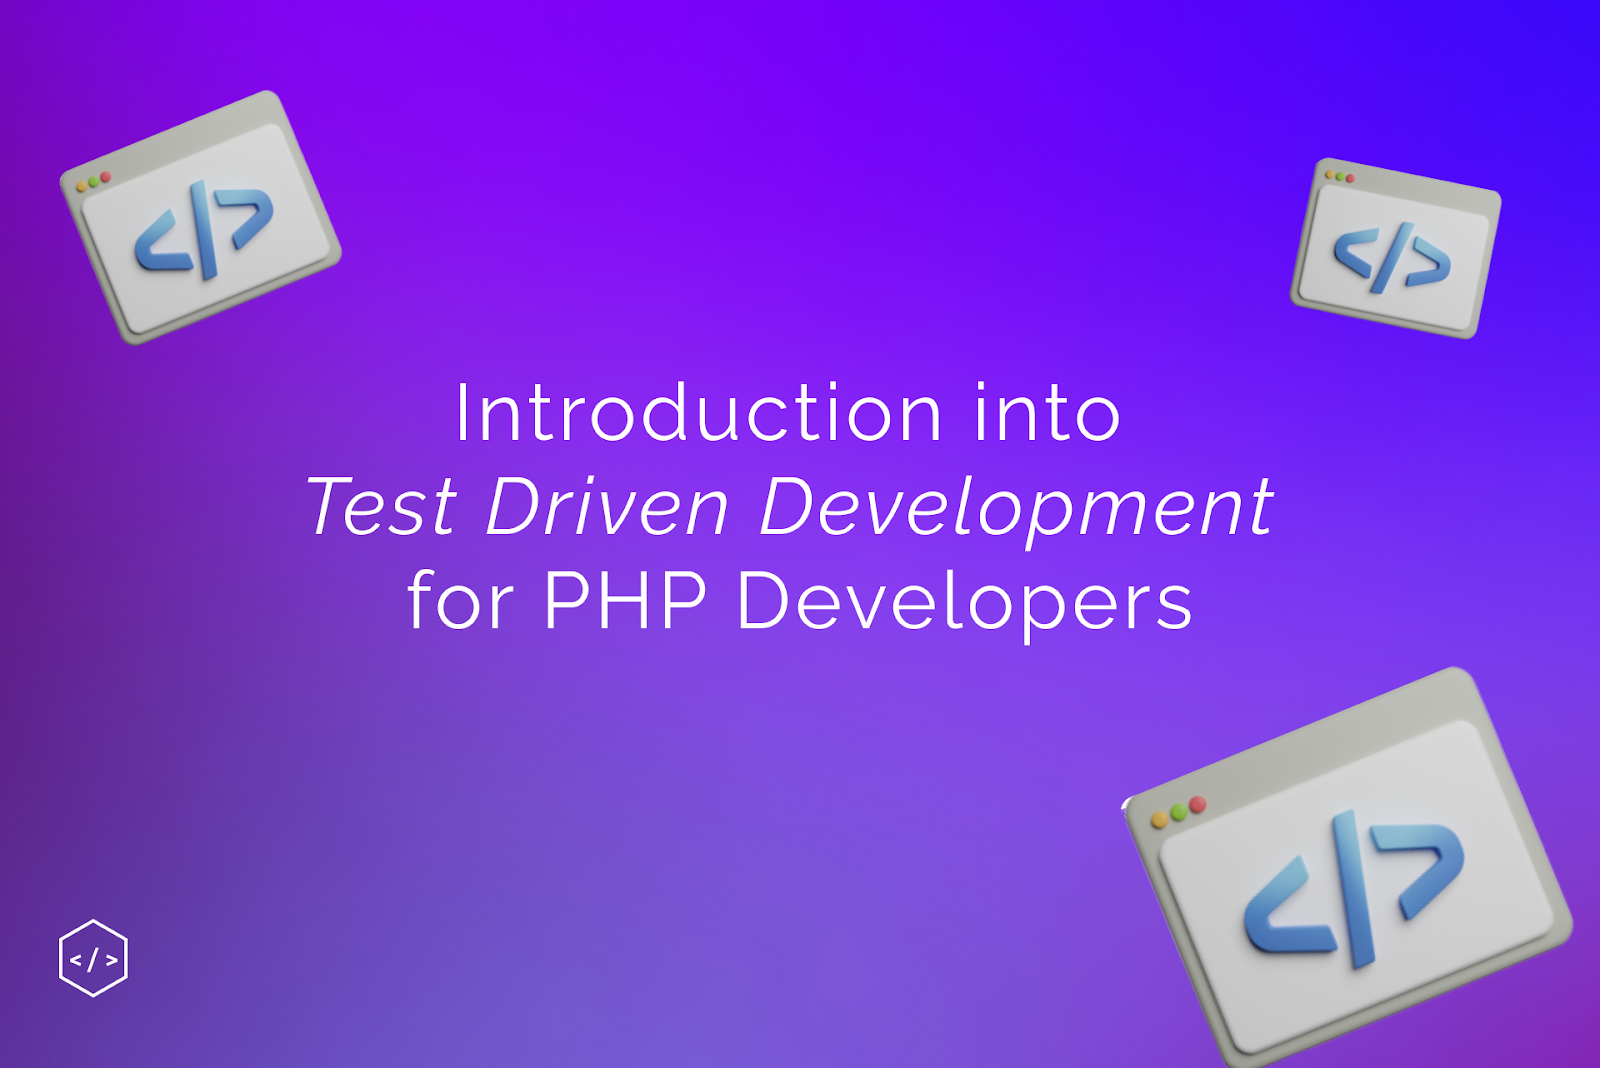 Introduction to Test-Driven Development for PHP Developers